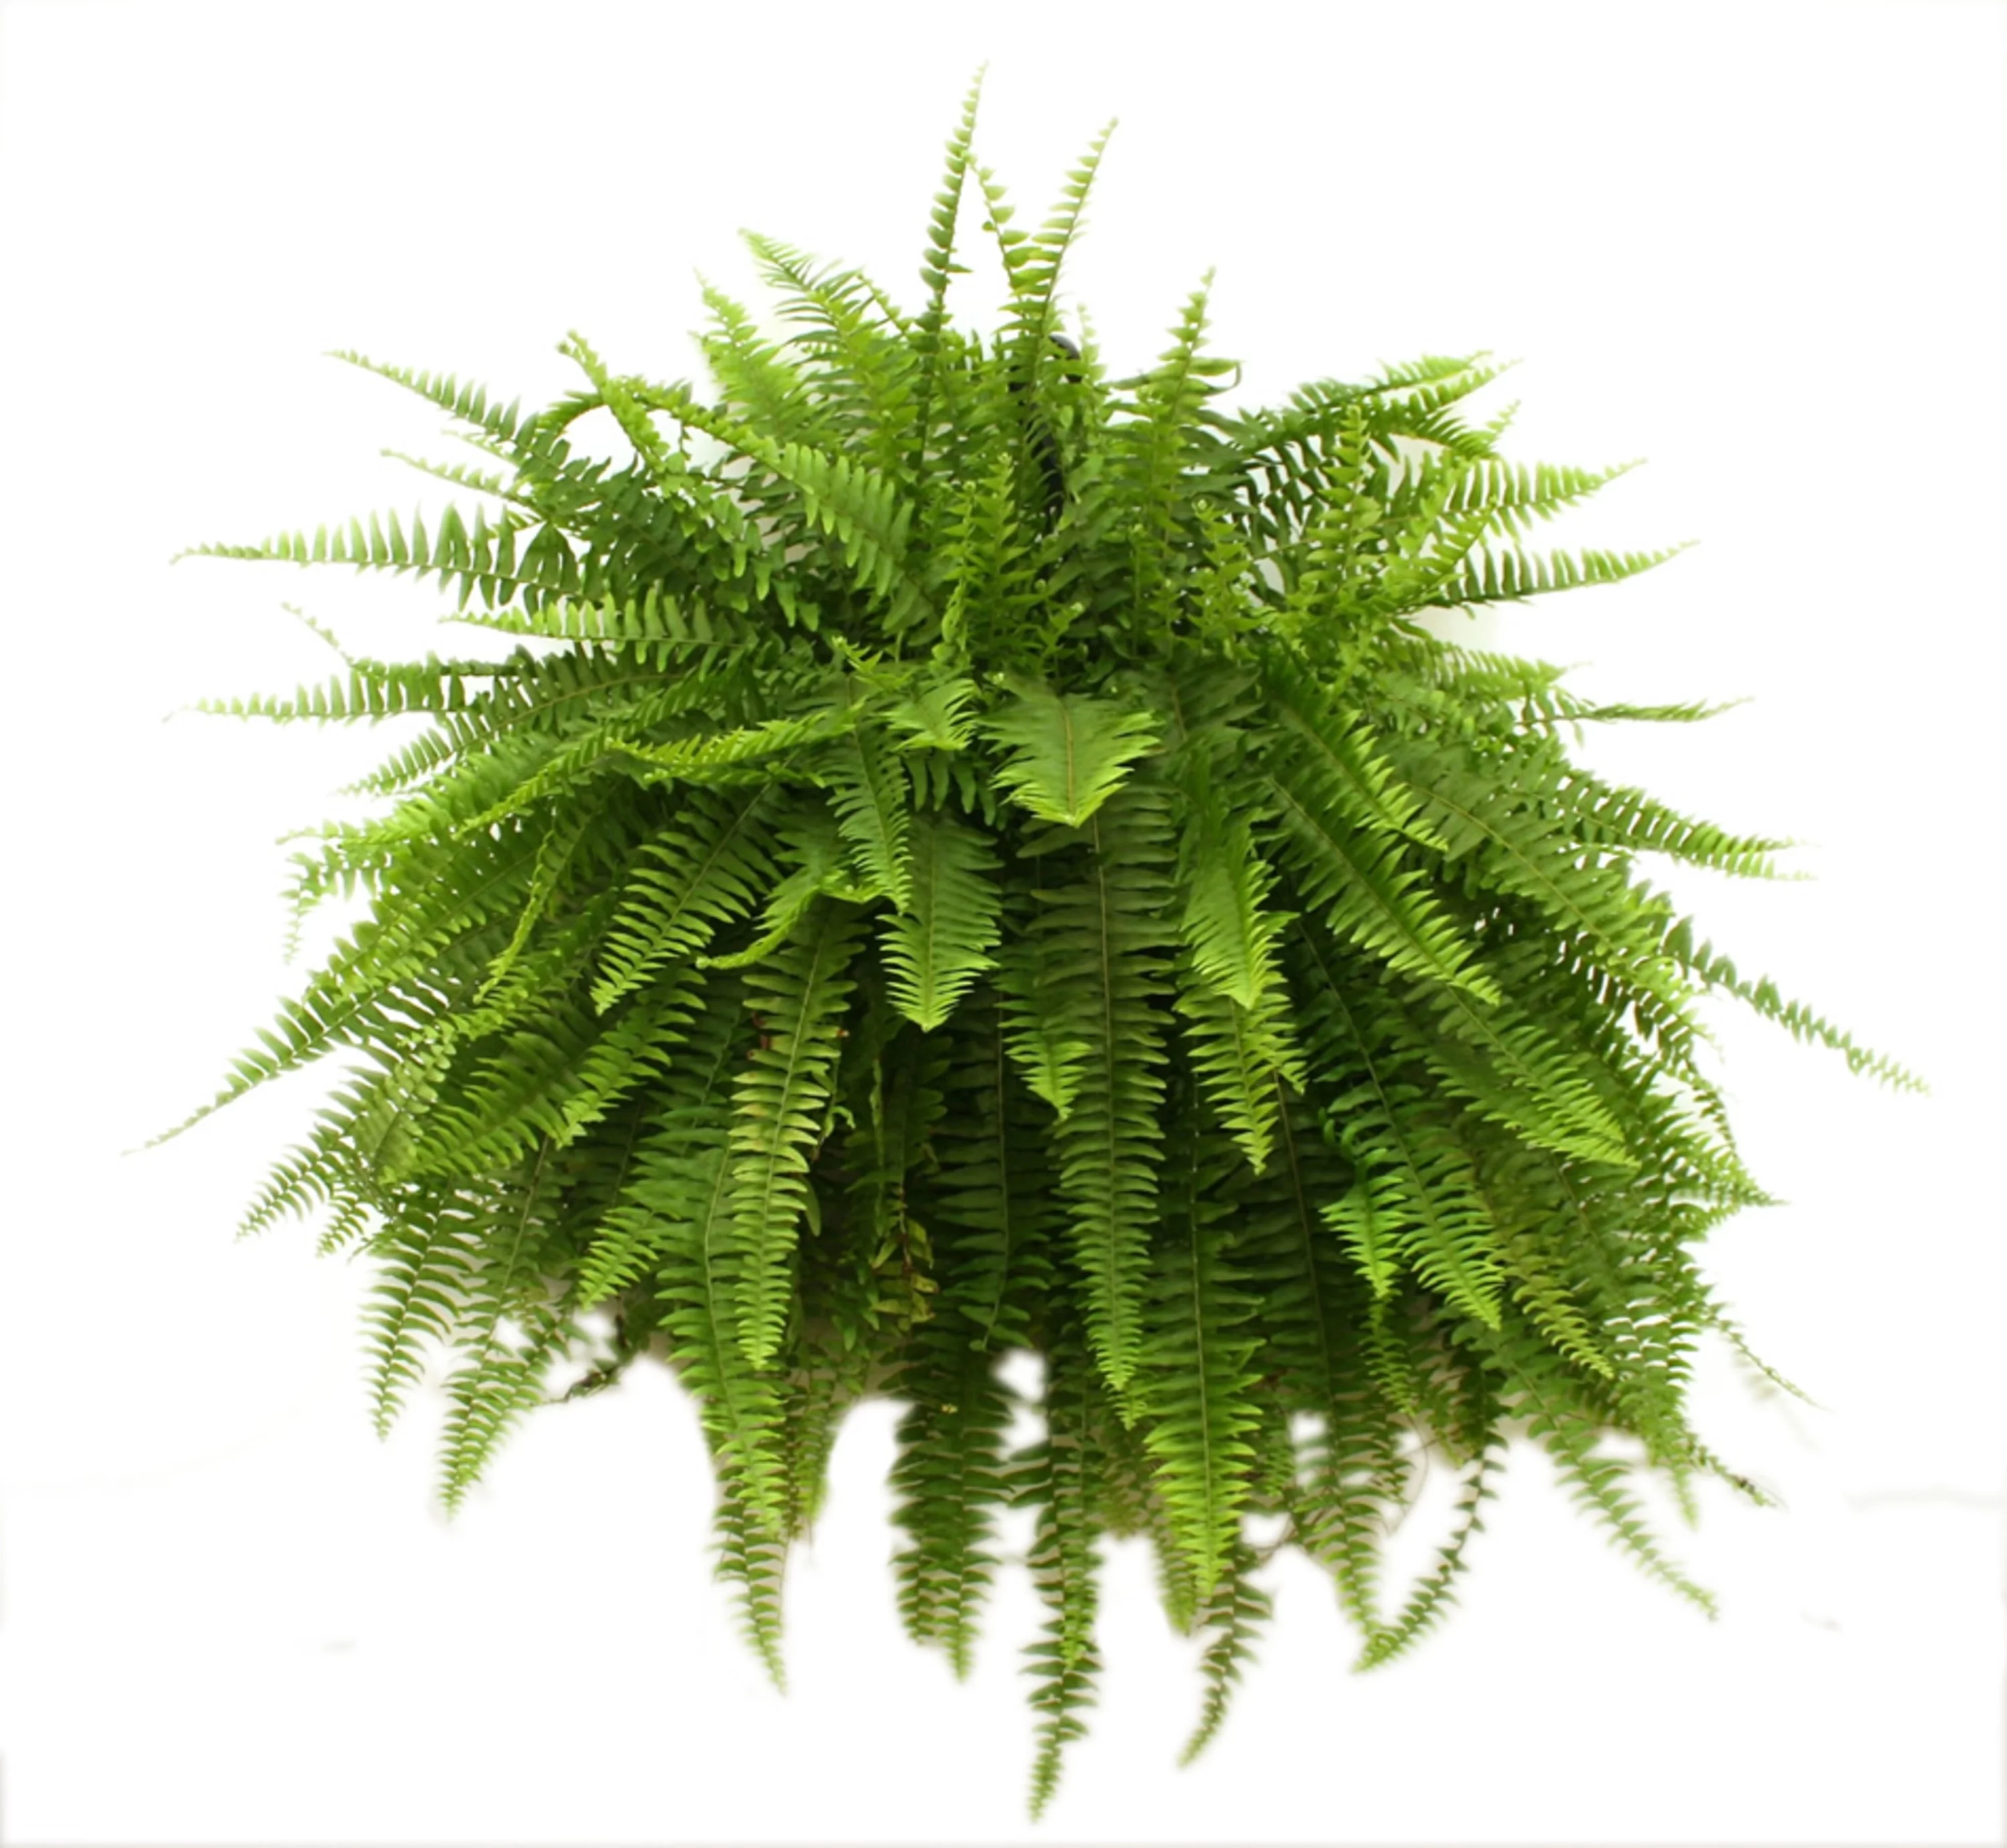 Costa Farms Expert Gardener Live Indoor 16in. Tall Green Boston Fern; Bright, Indirect Sunlight Plant in 10in. Grower Pot